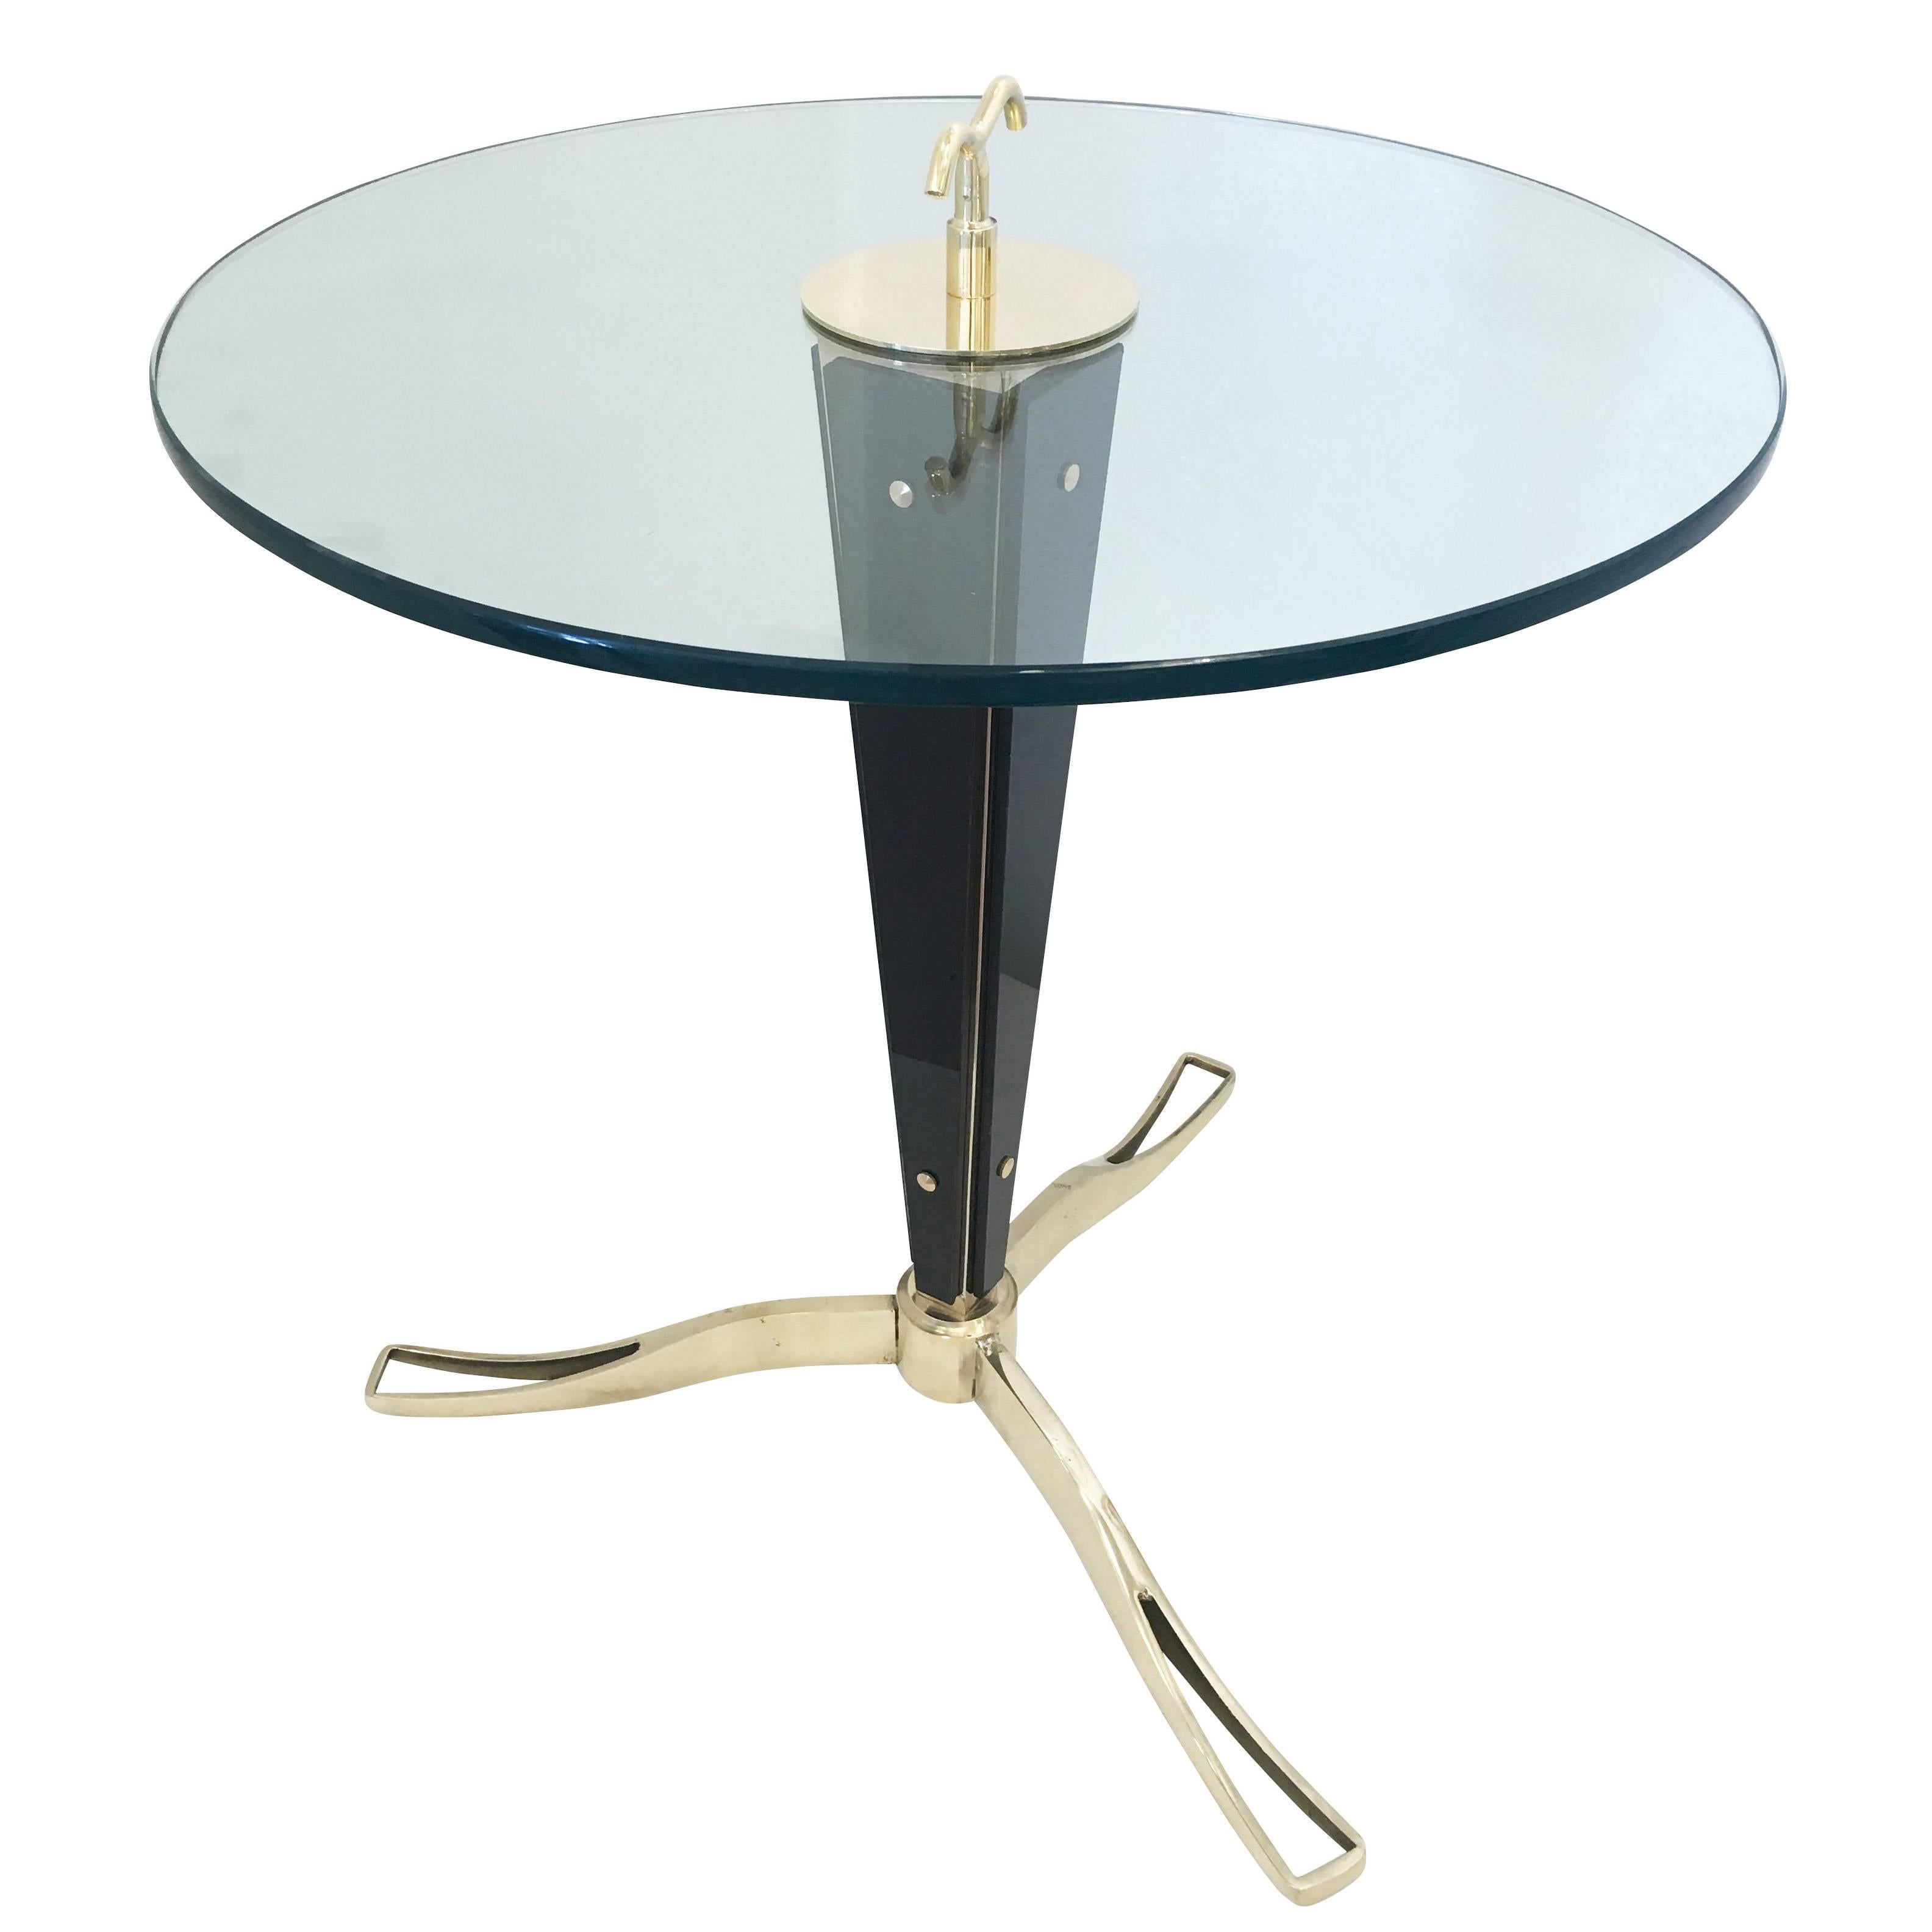 Nero Glass Side Table by Daniele Bottacin for Gaspare Asaro